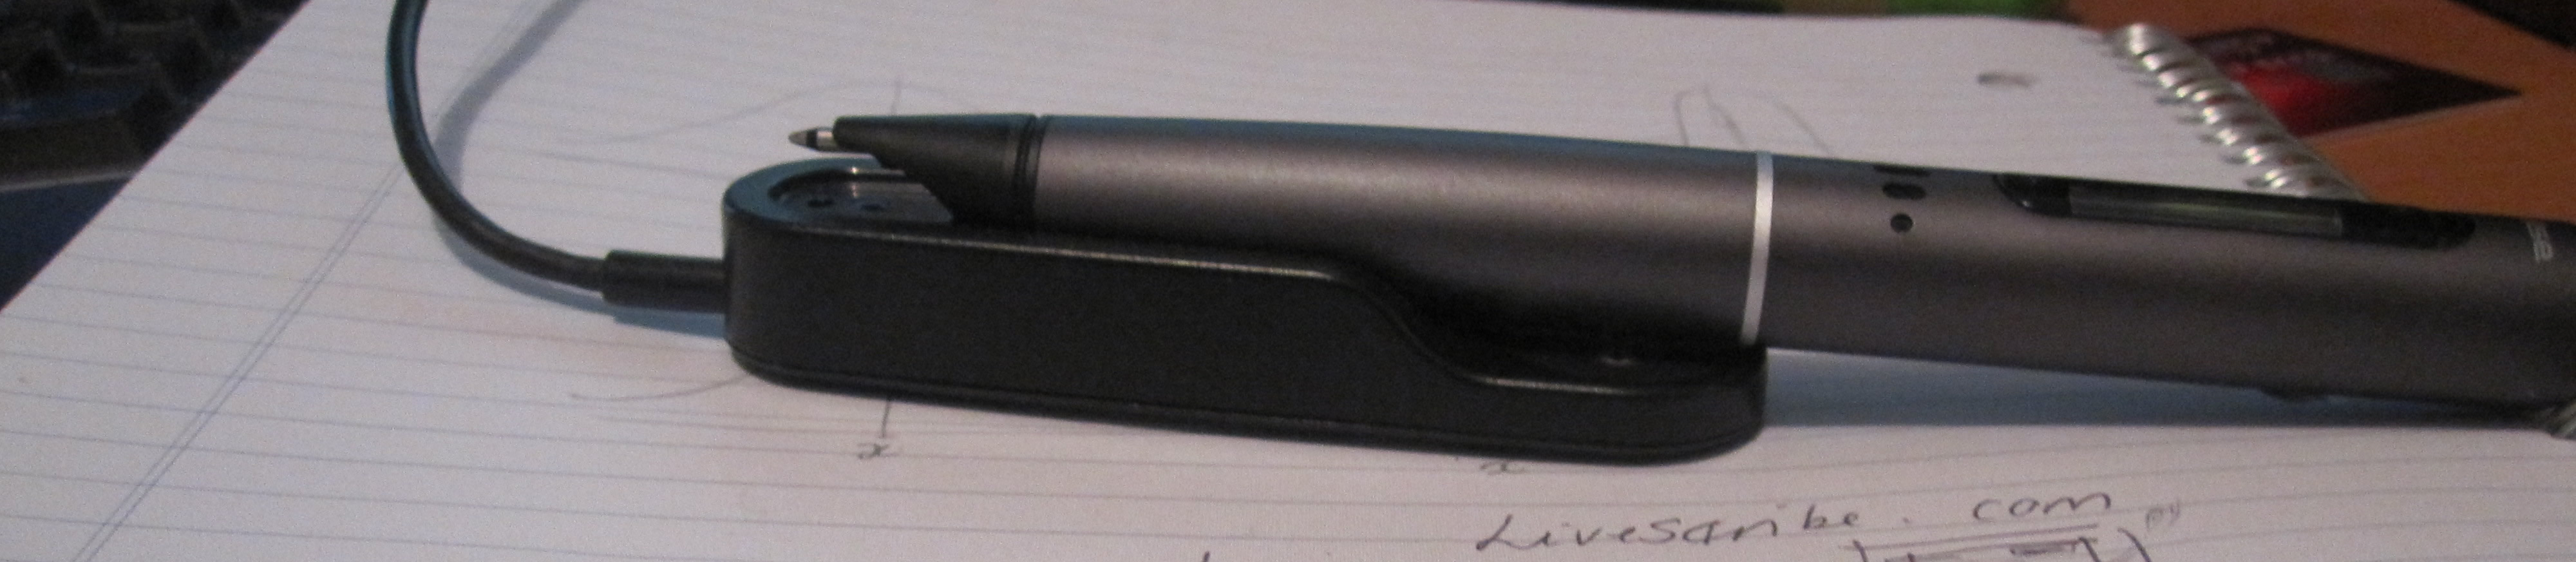 The pen charges on a small black block.